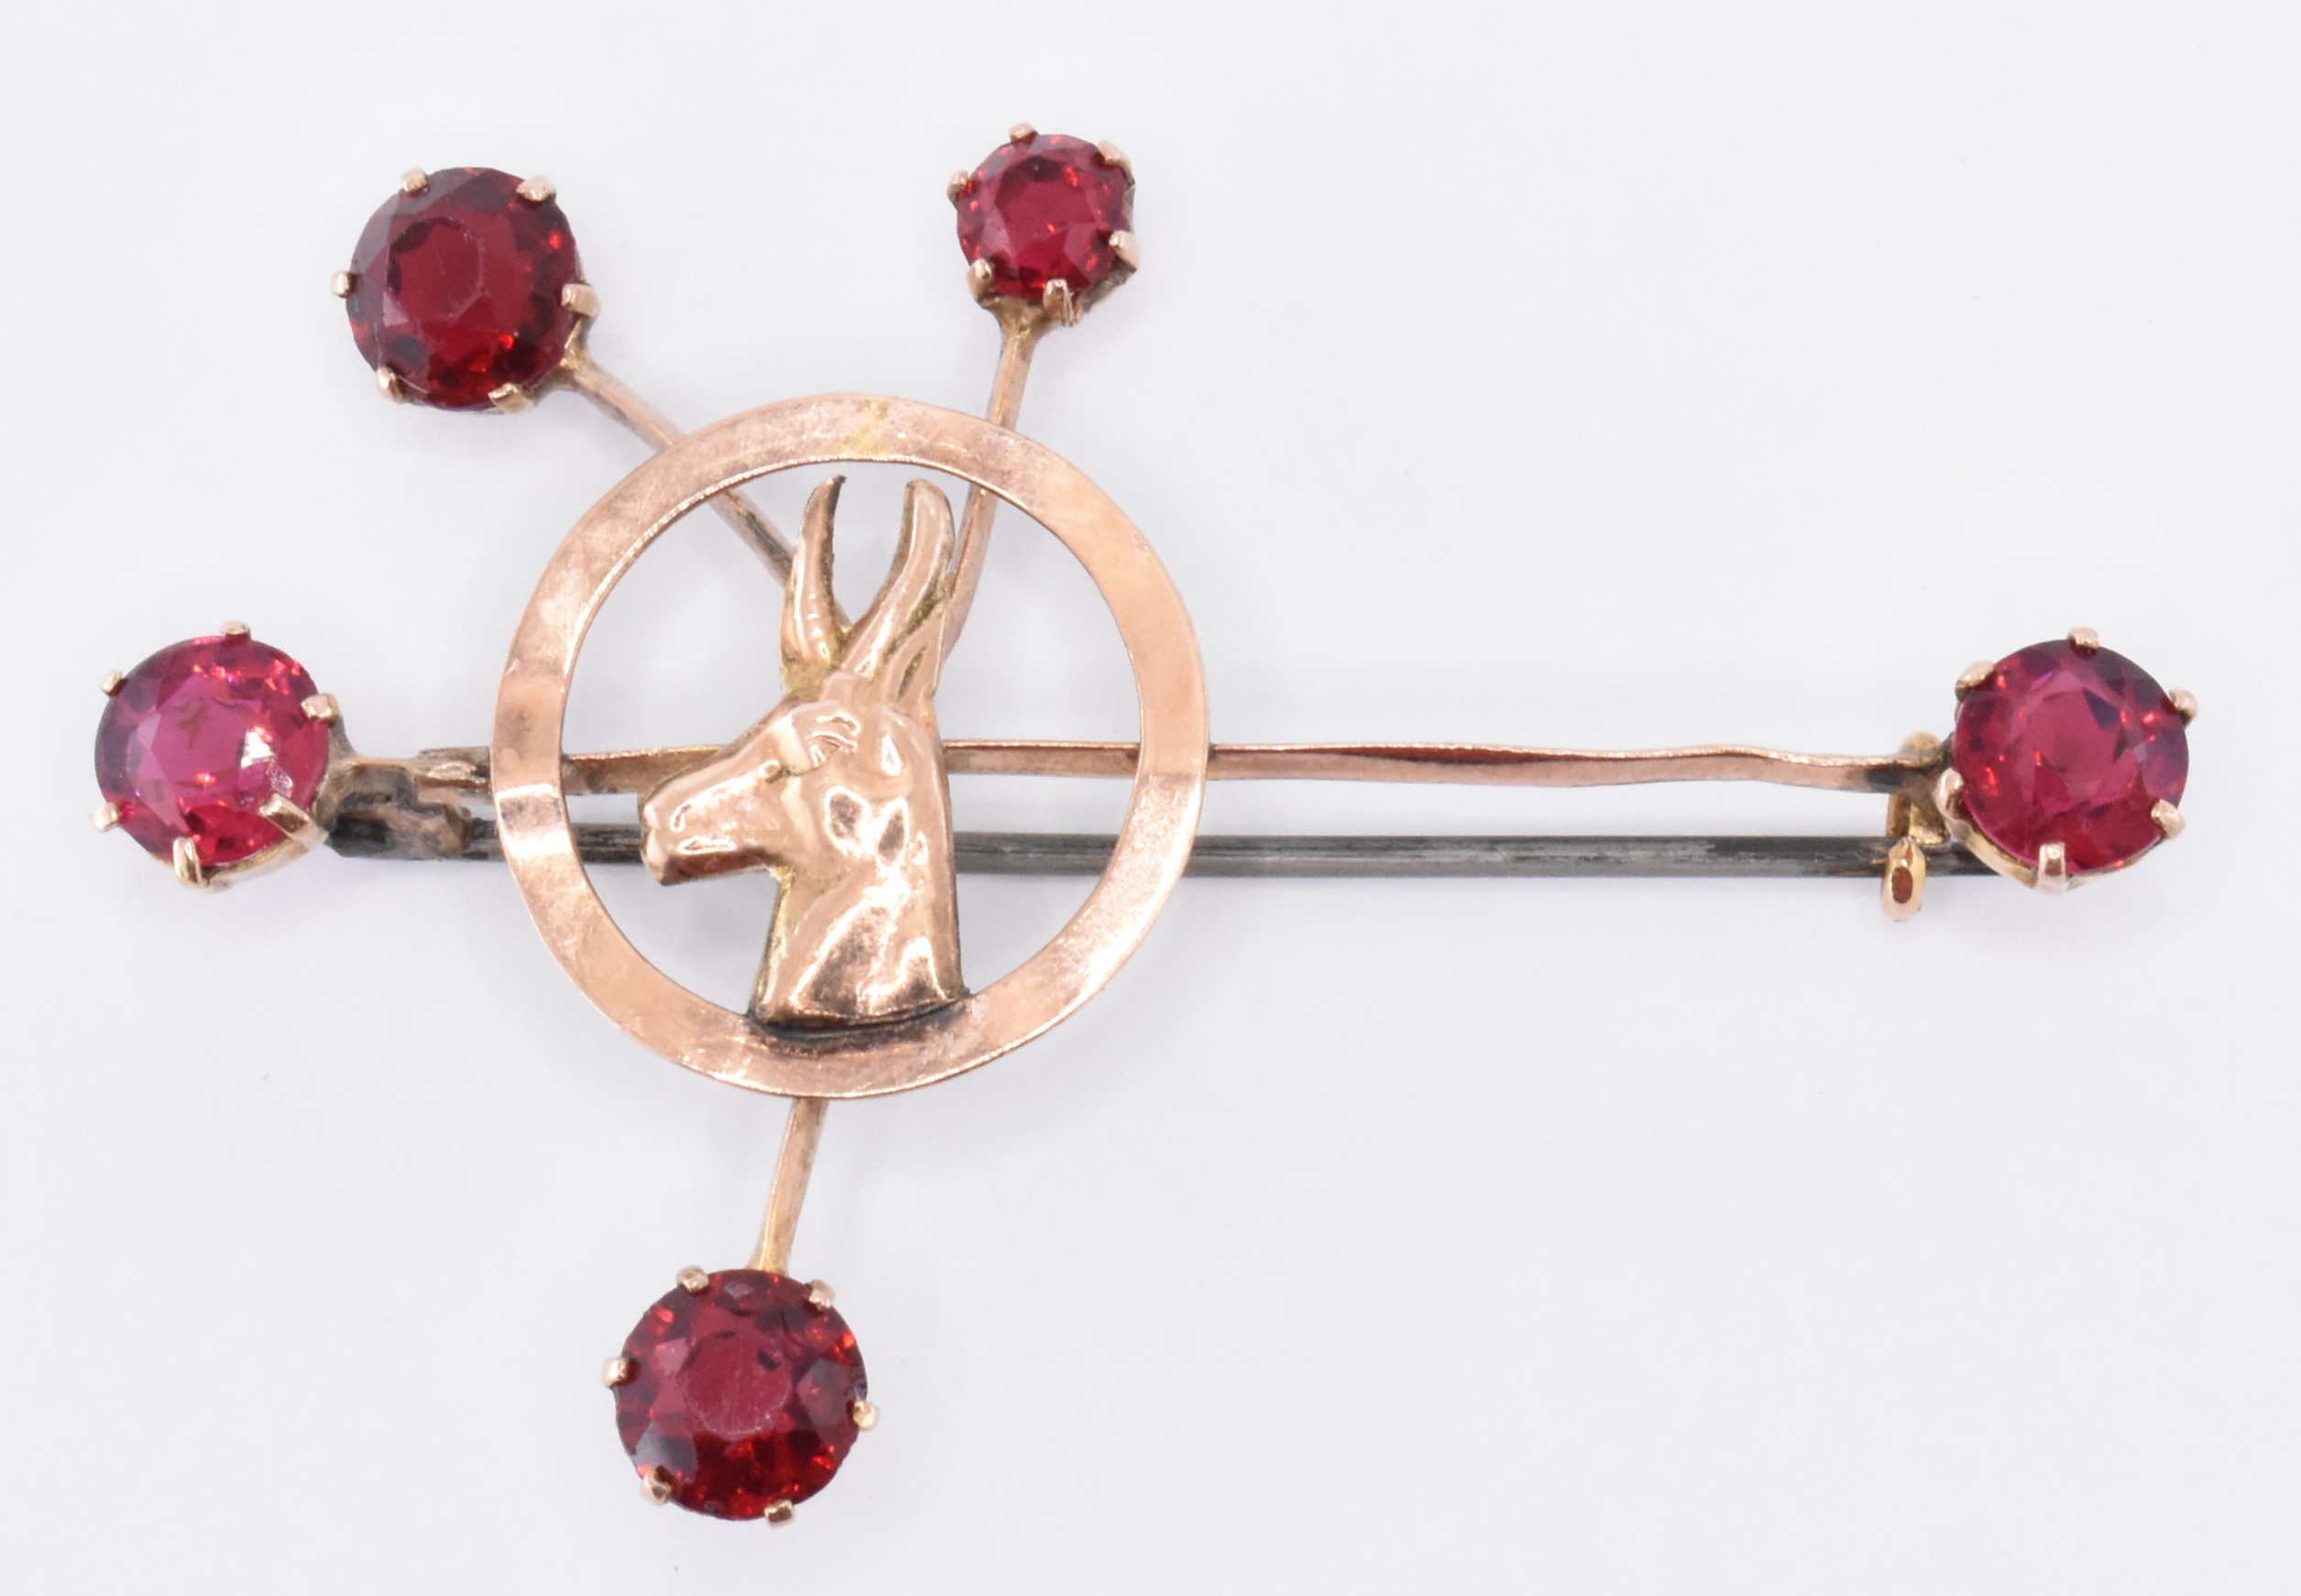 9CT GOLD & RED STONE SPRINGBOK BROOCH - Image 2 of 4